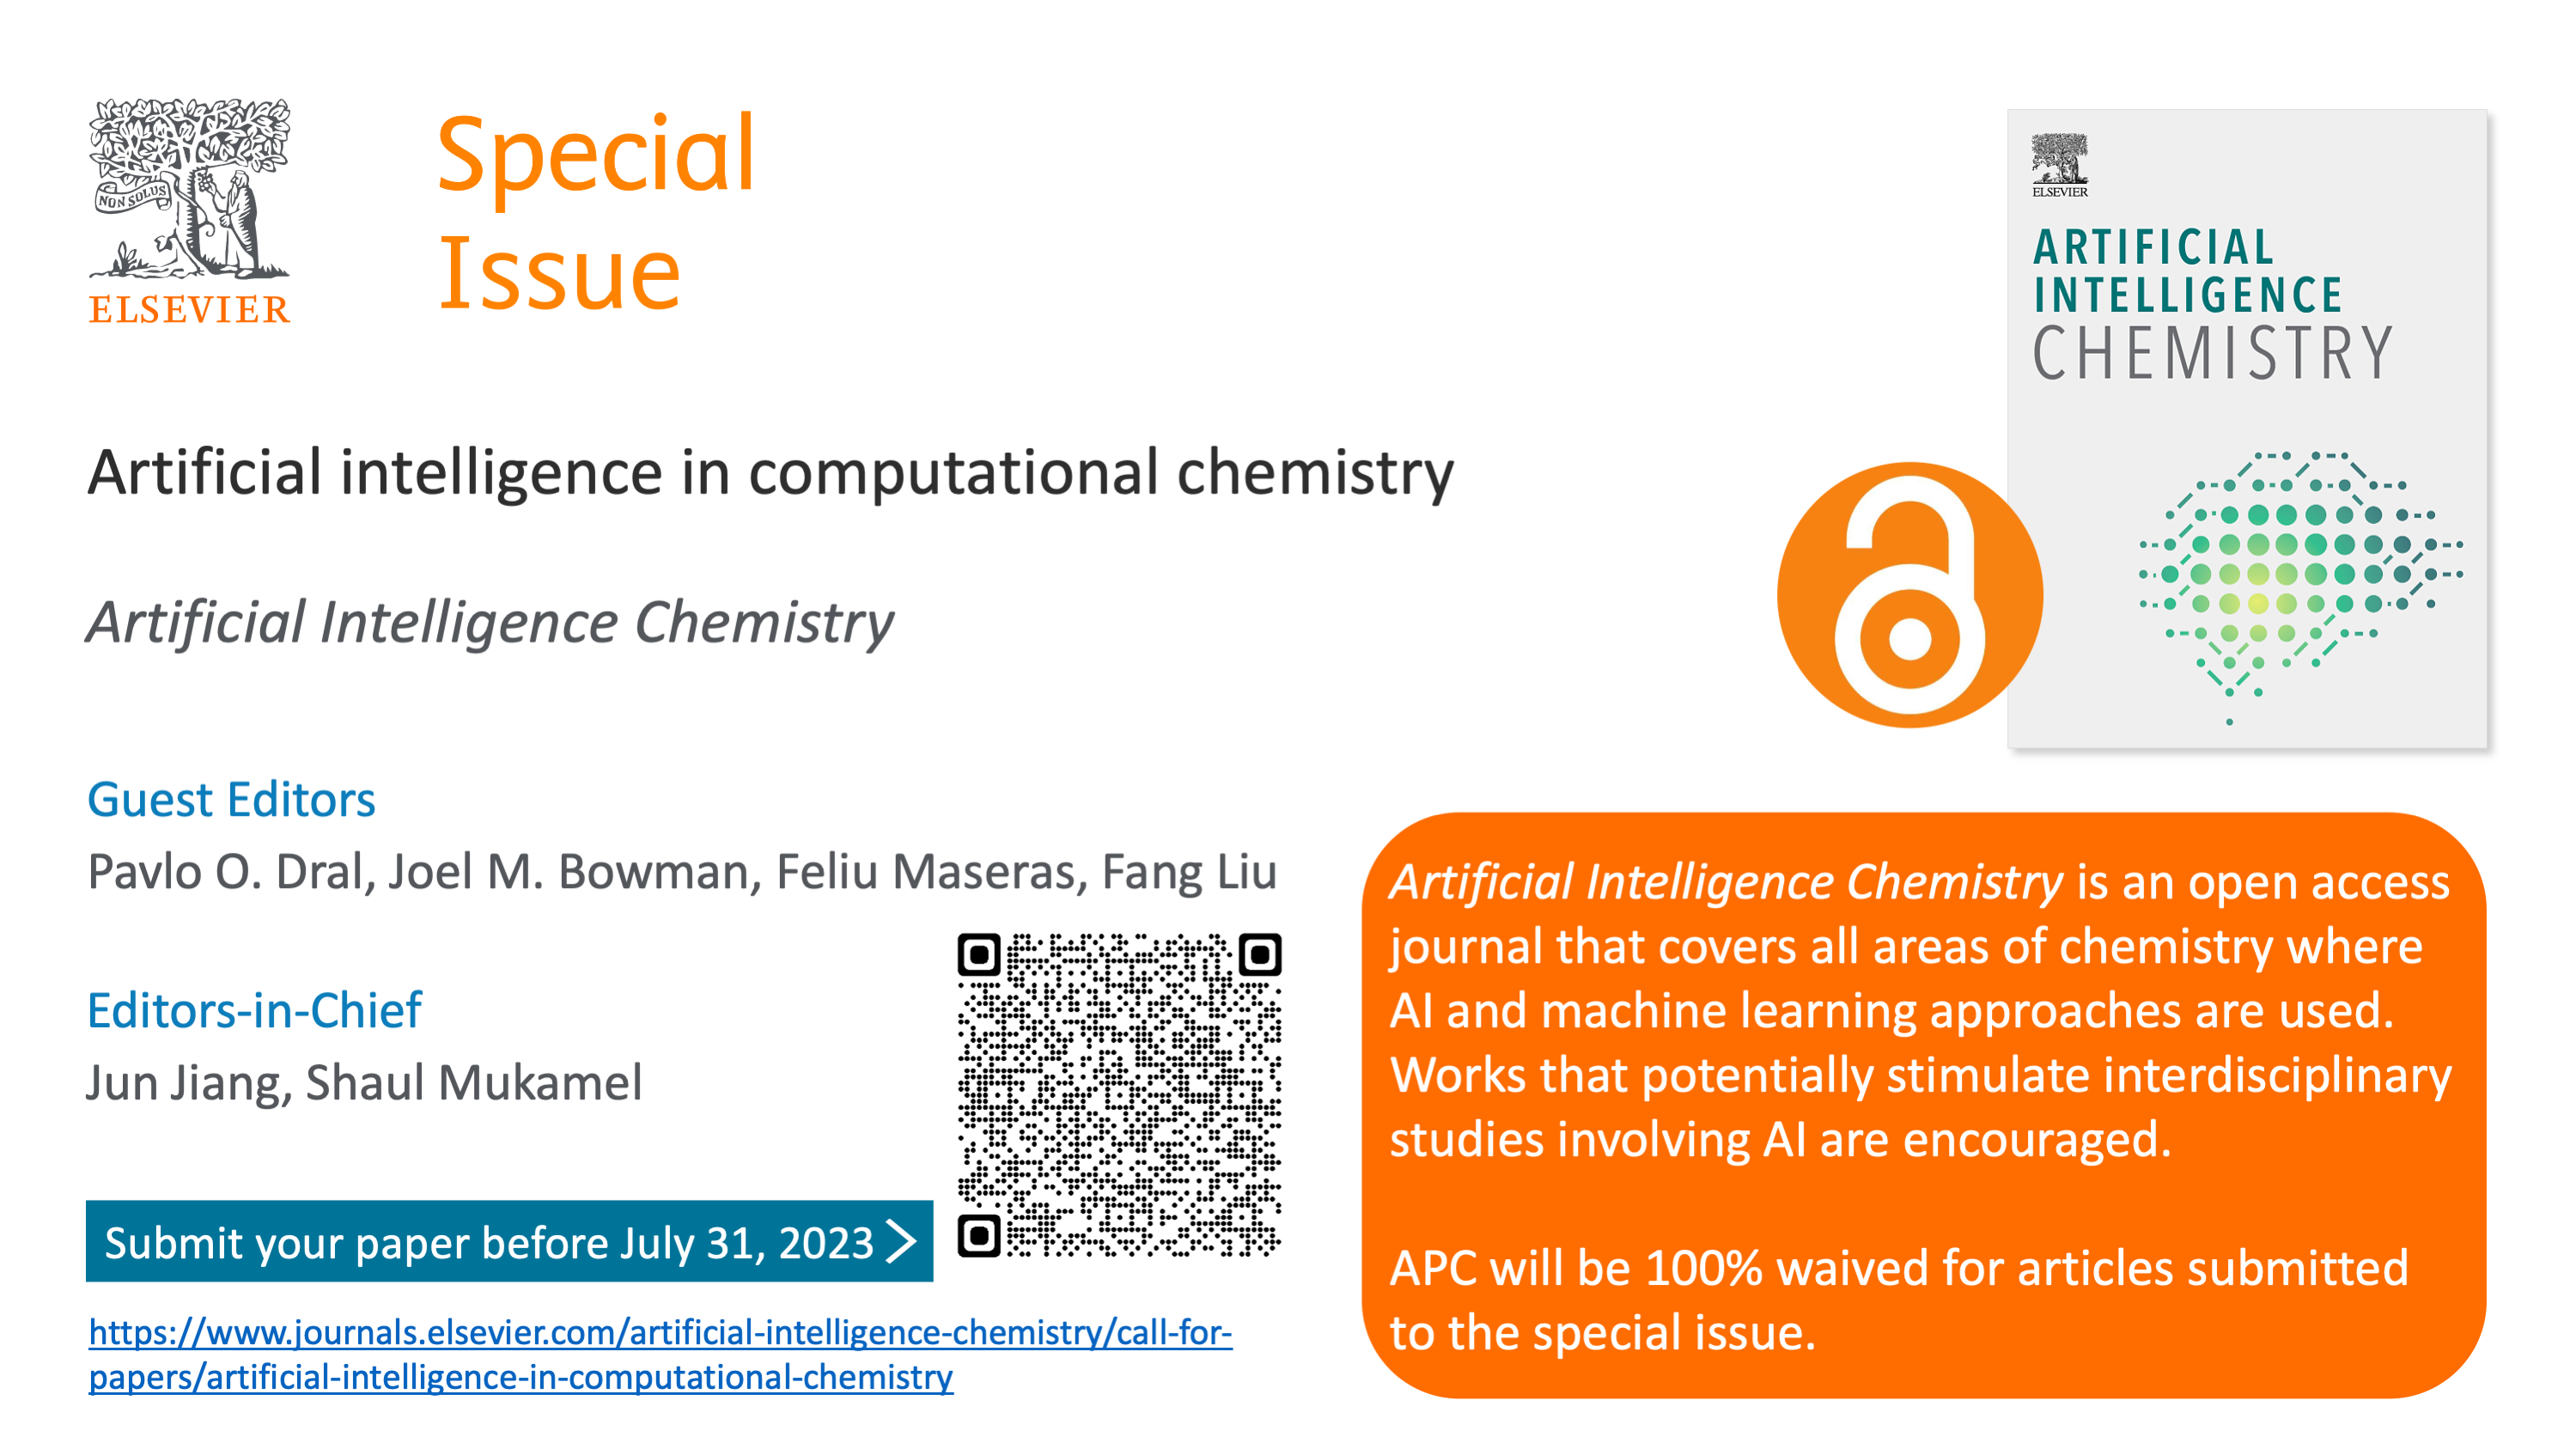 Special Issue on Artificial intelligence in computational chemistry